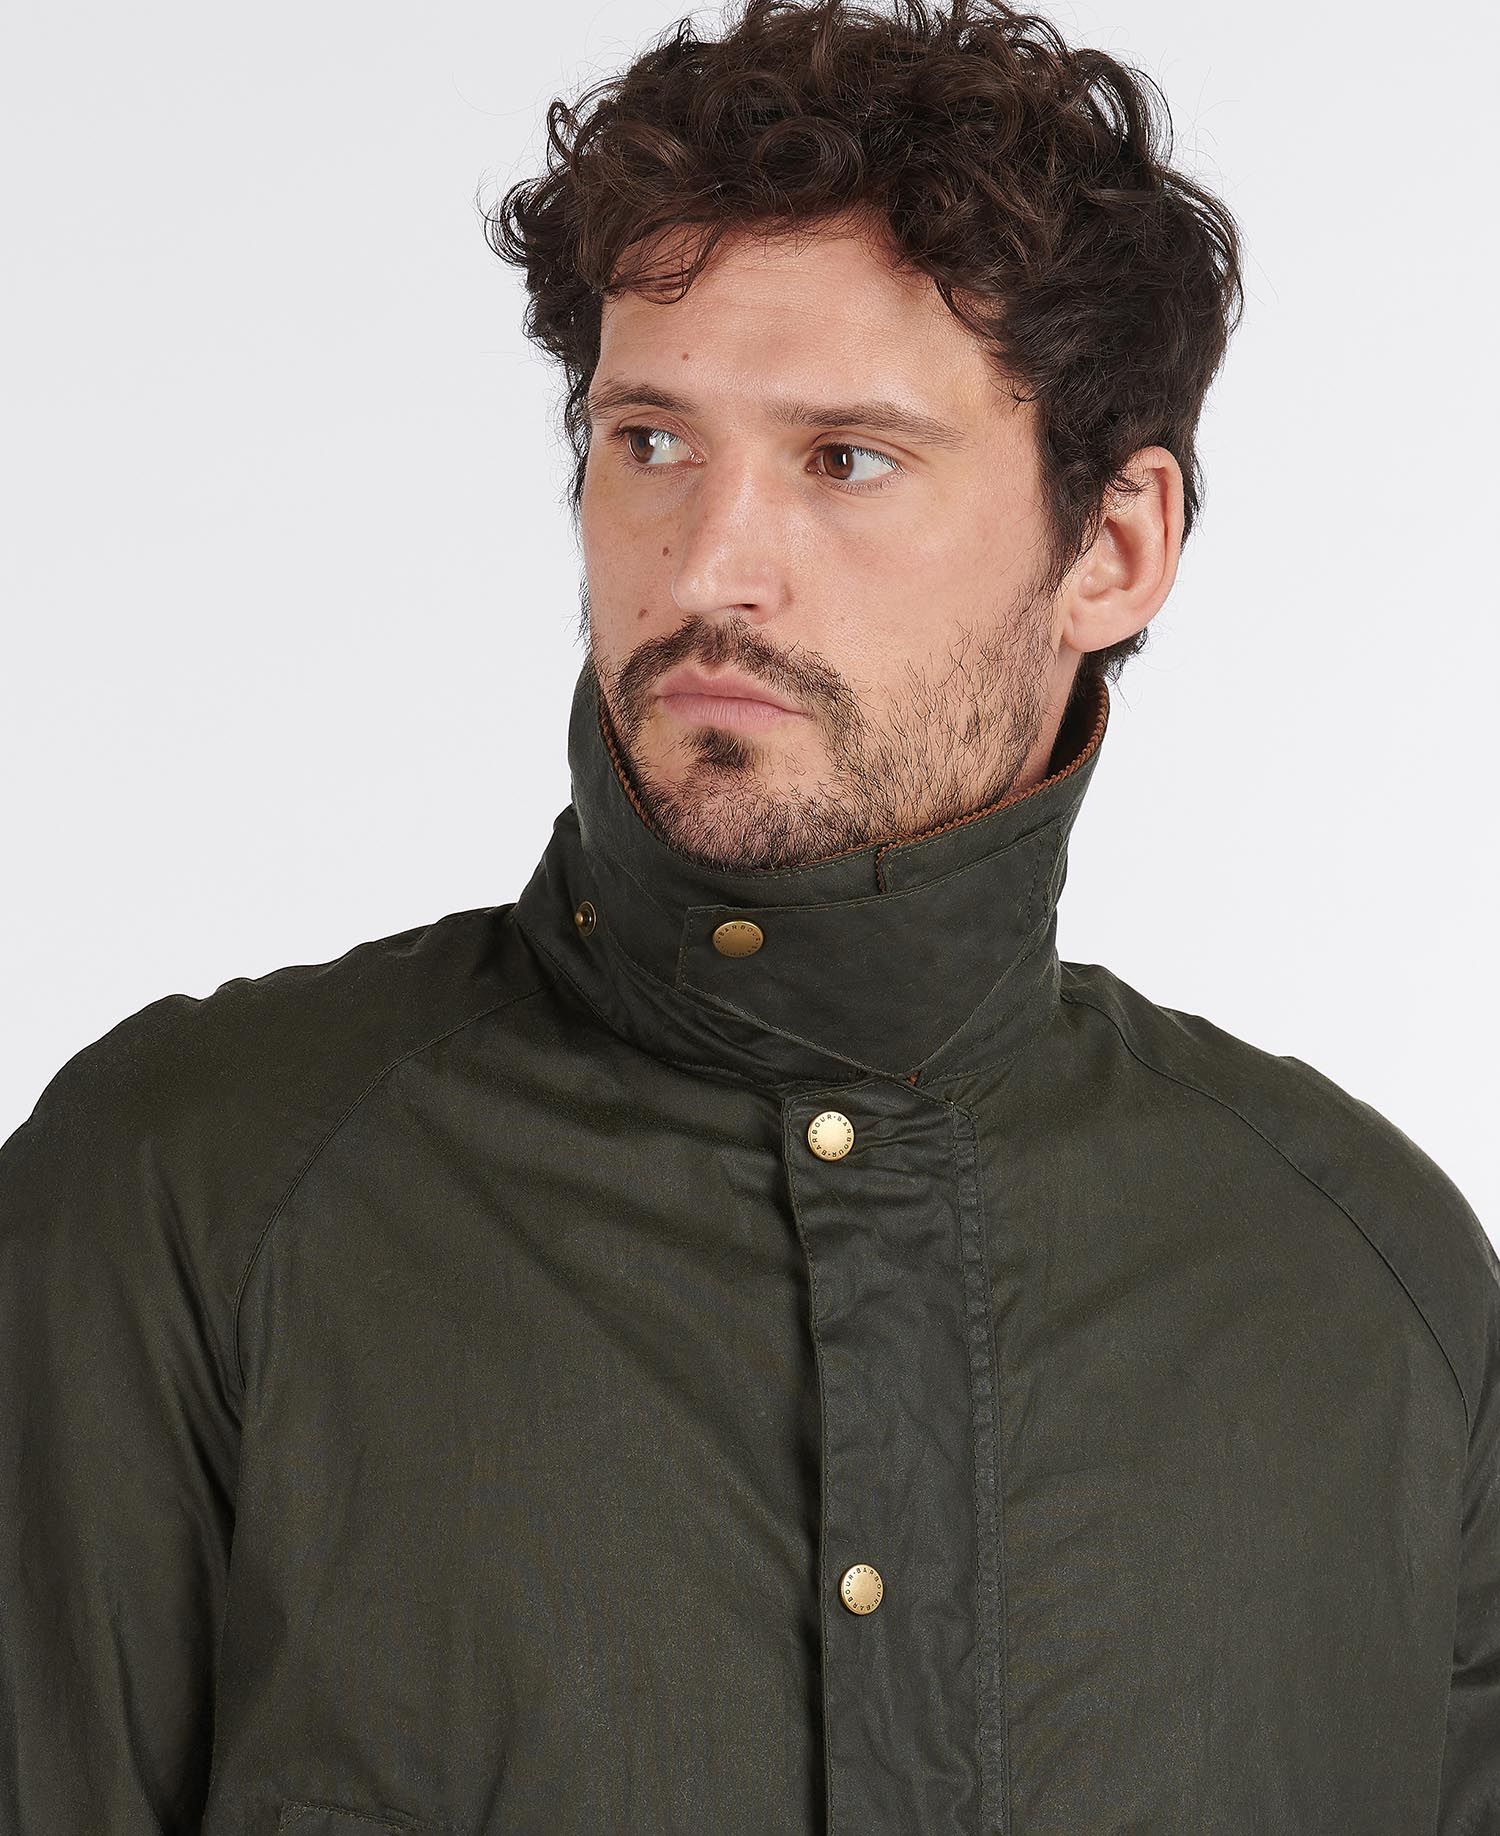 Barbour Lightweight Ashby Waxed Cotton Jacket in Green | Barbour